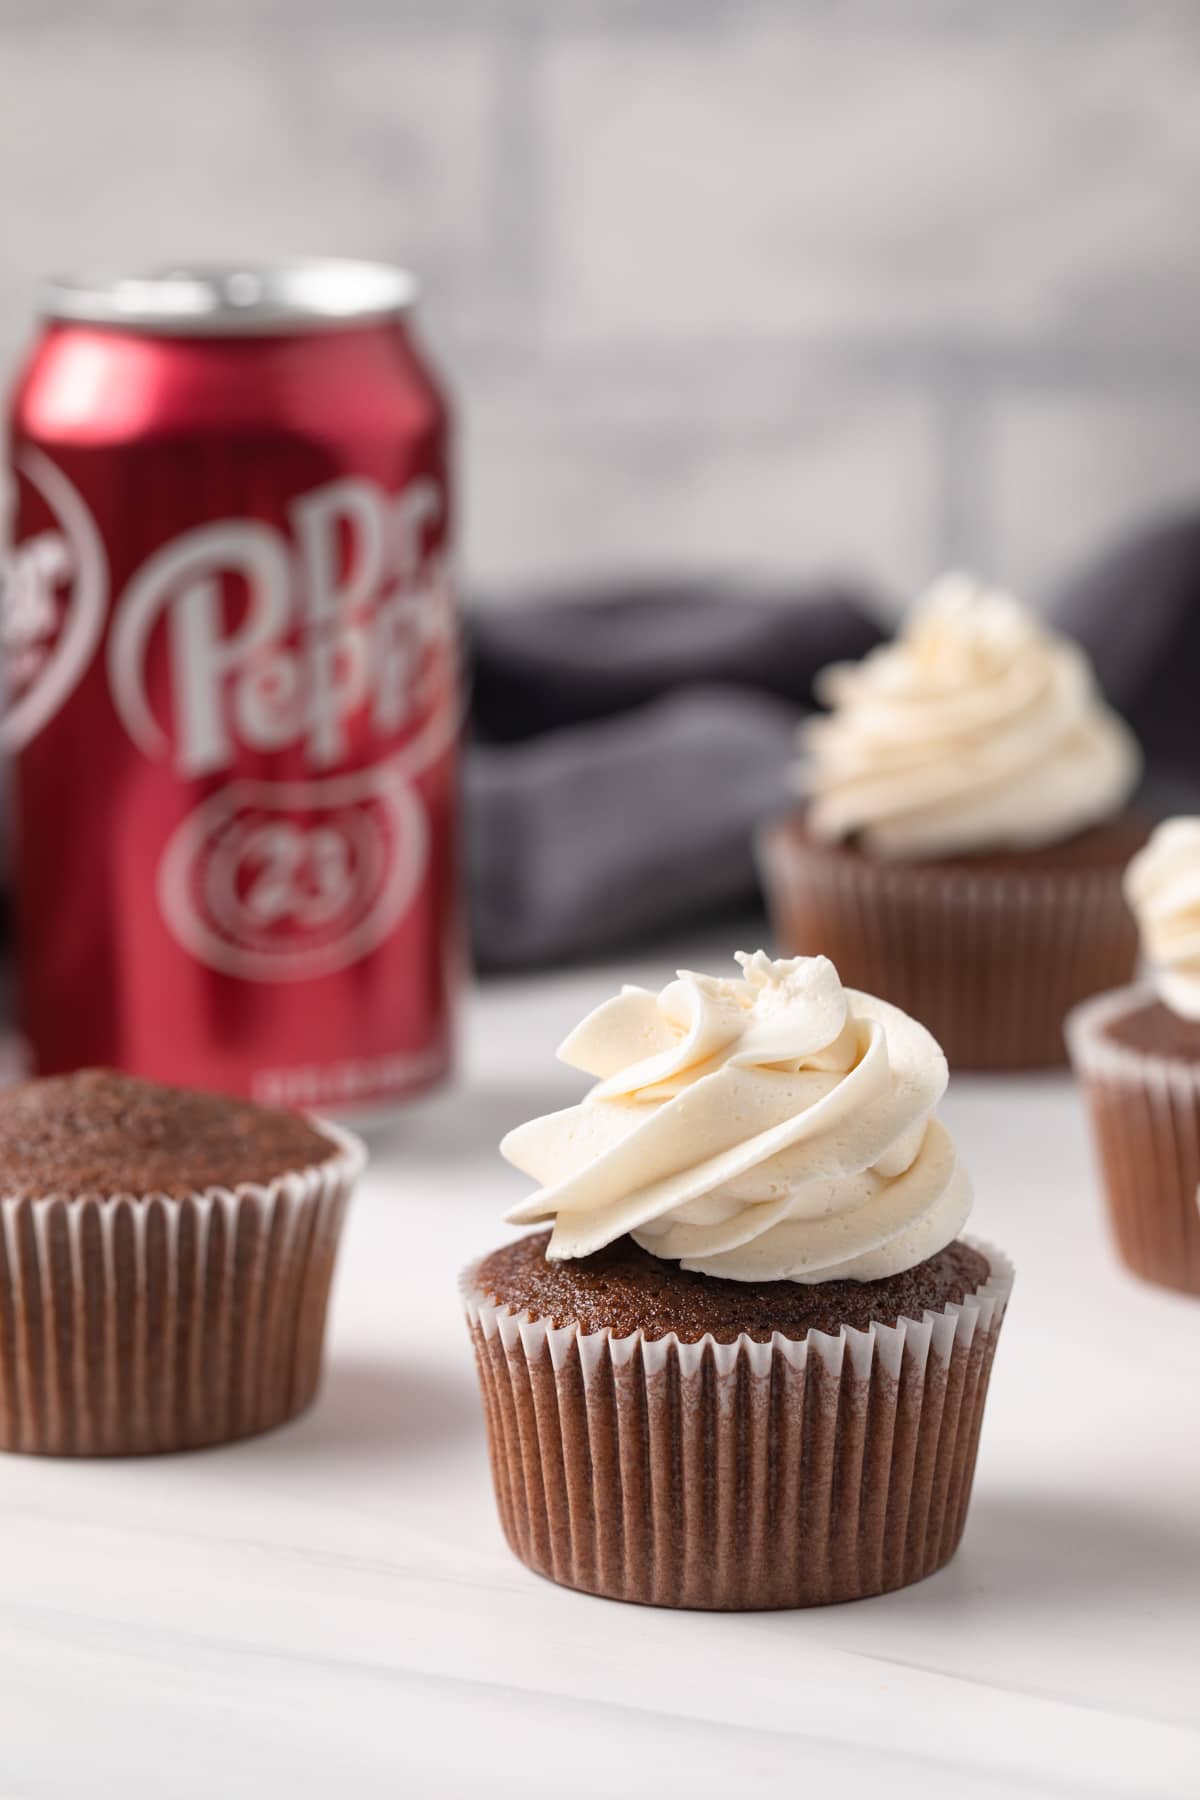 Dr Pepper cupcakes from scratch